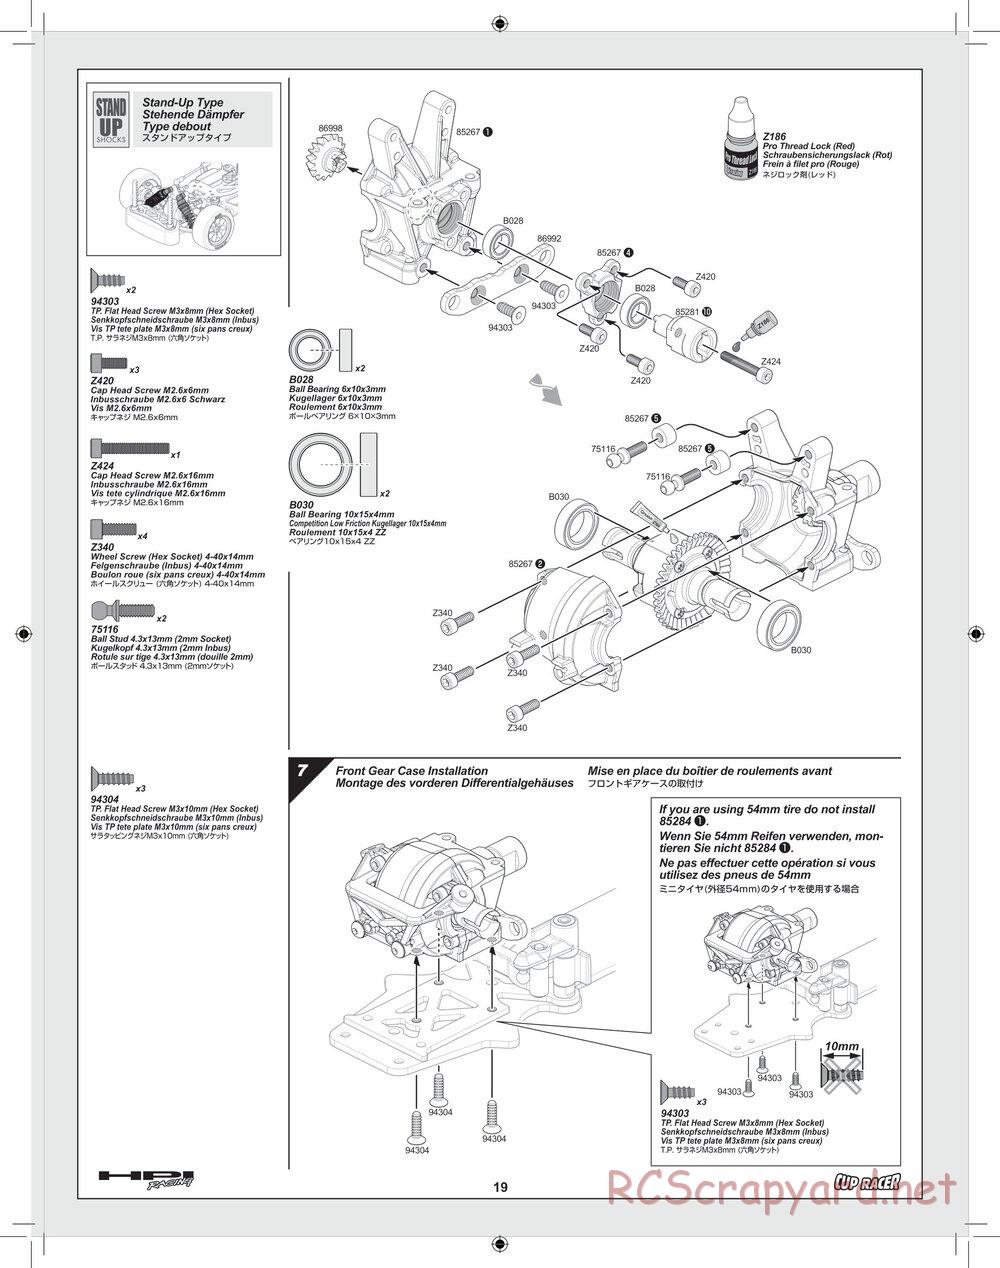 HPI - Cup Racer - Manual - Page 19